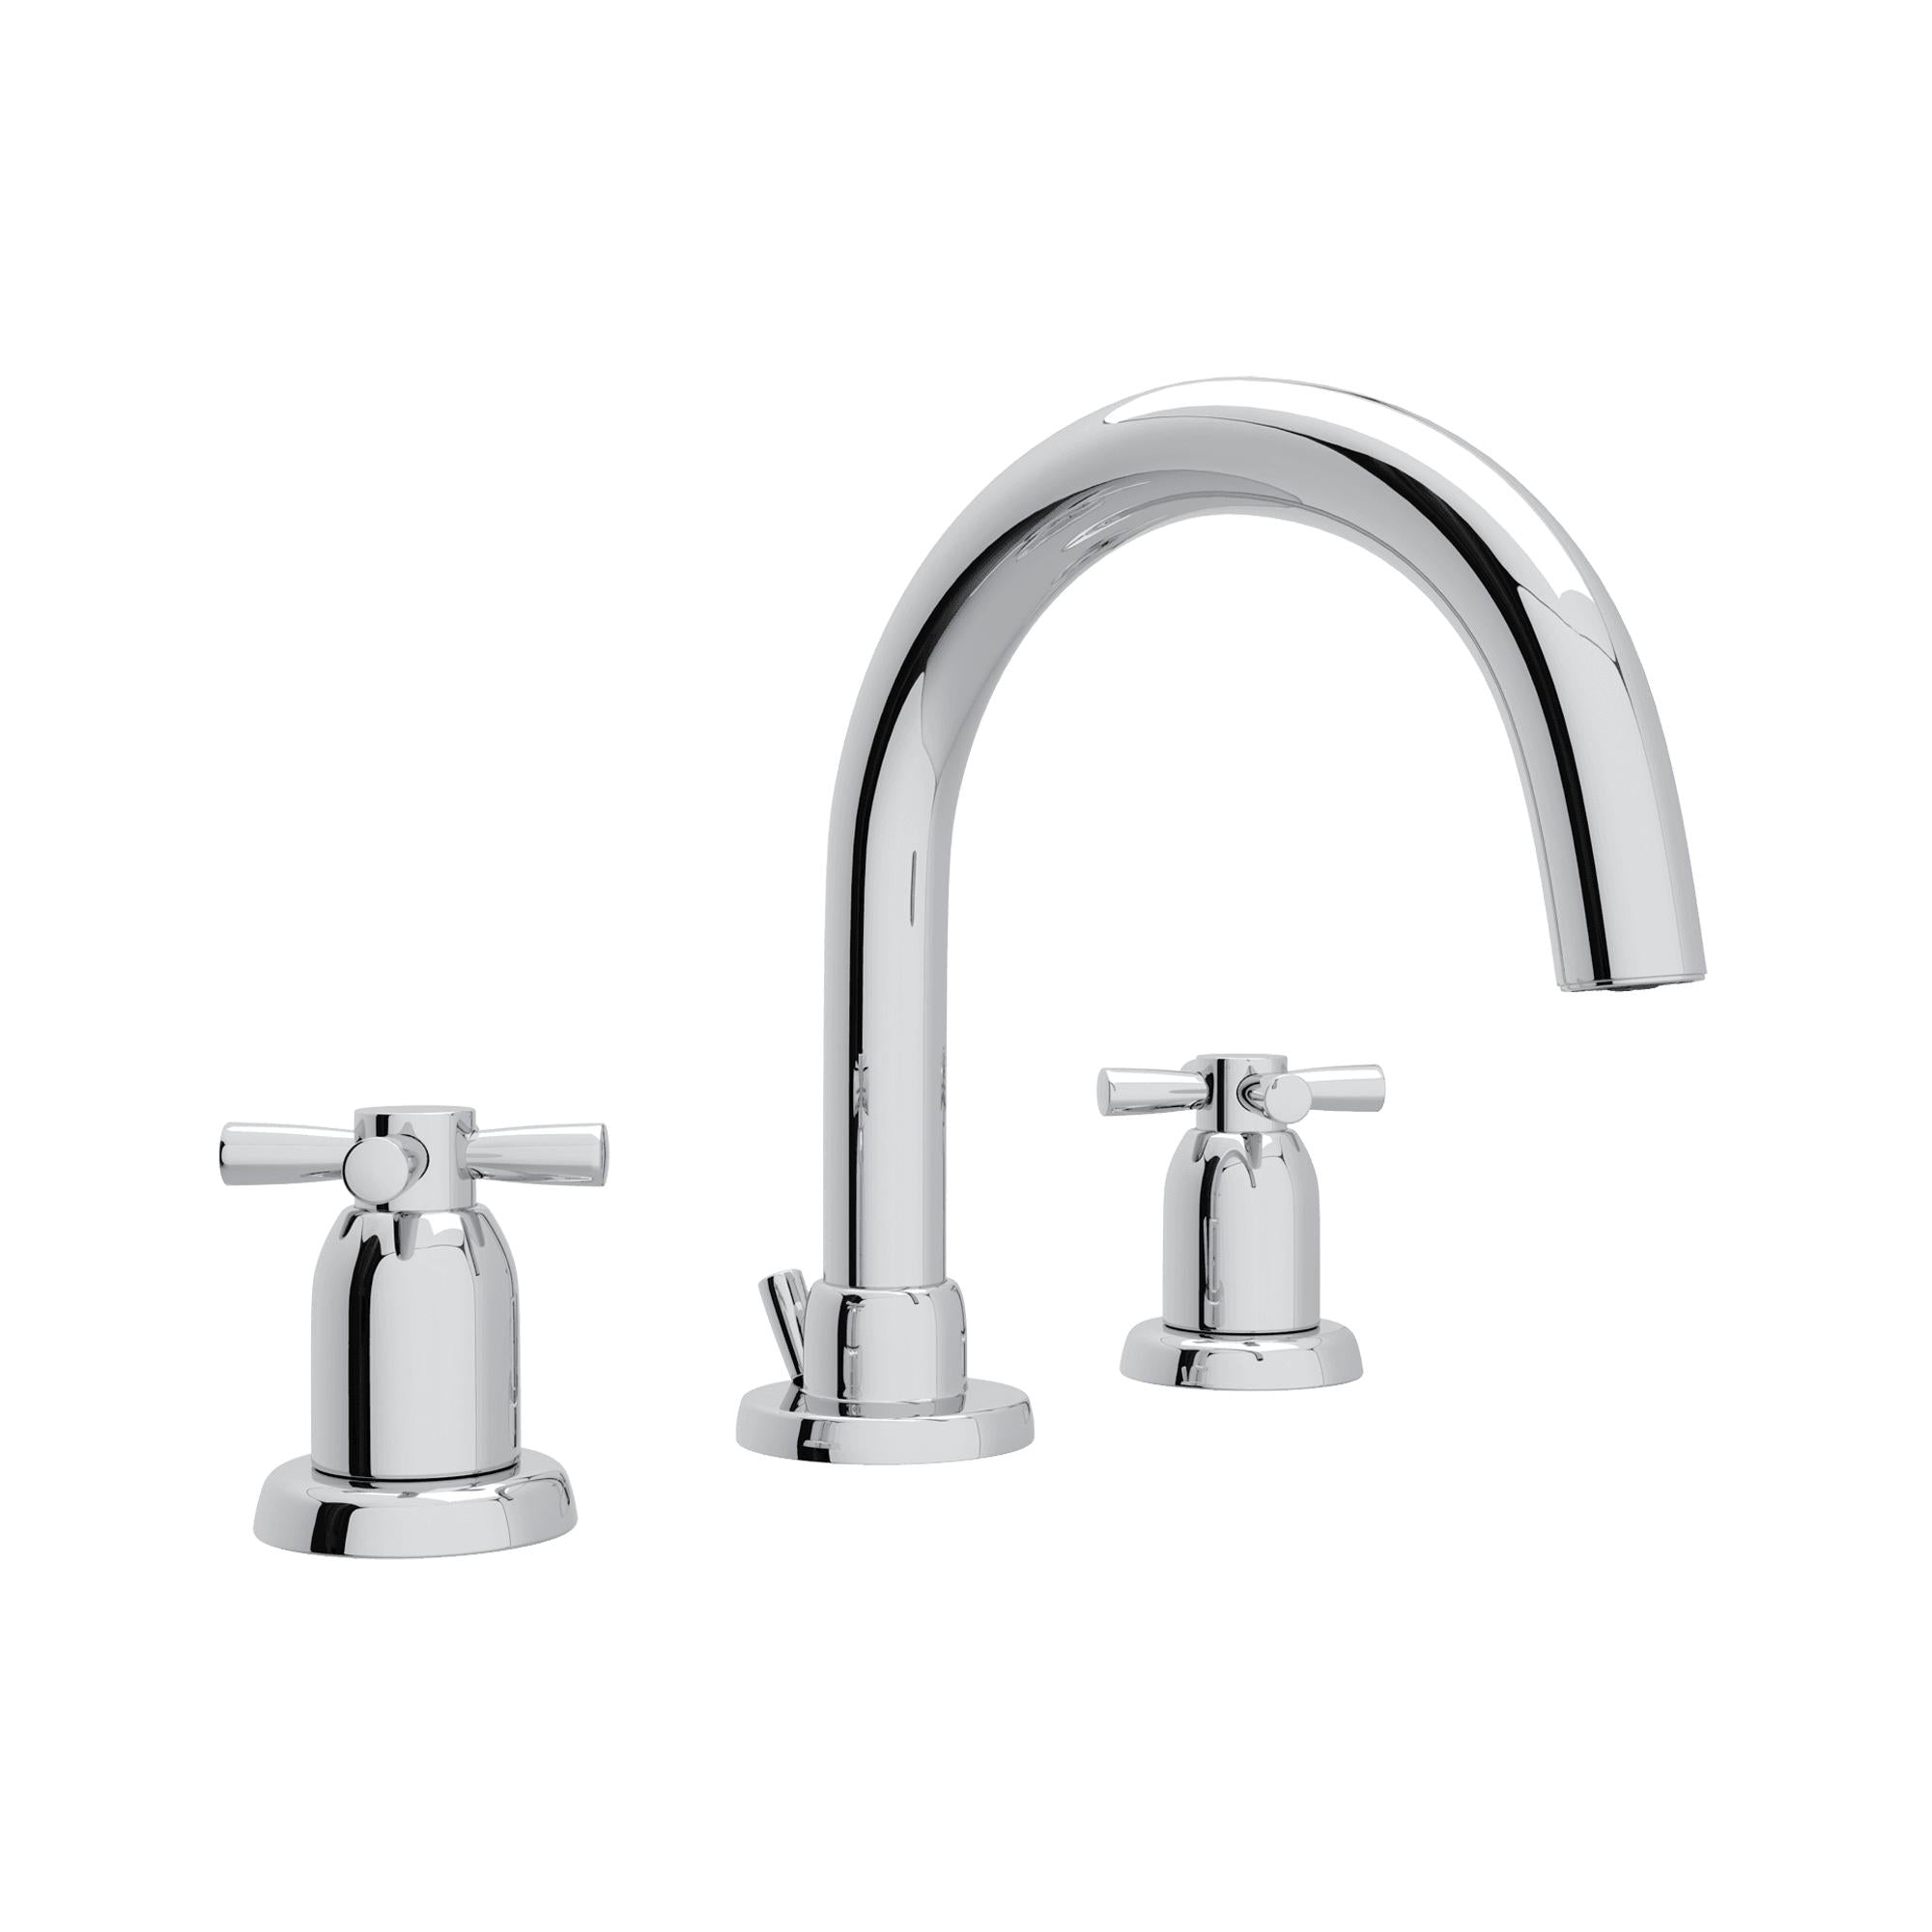 Perrin & Rowe U.3956 Holborn Widespread Lavatory Faucet With C-Spout